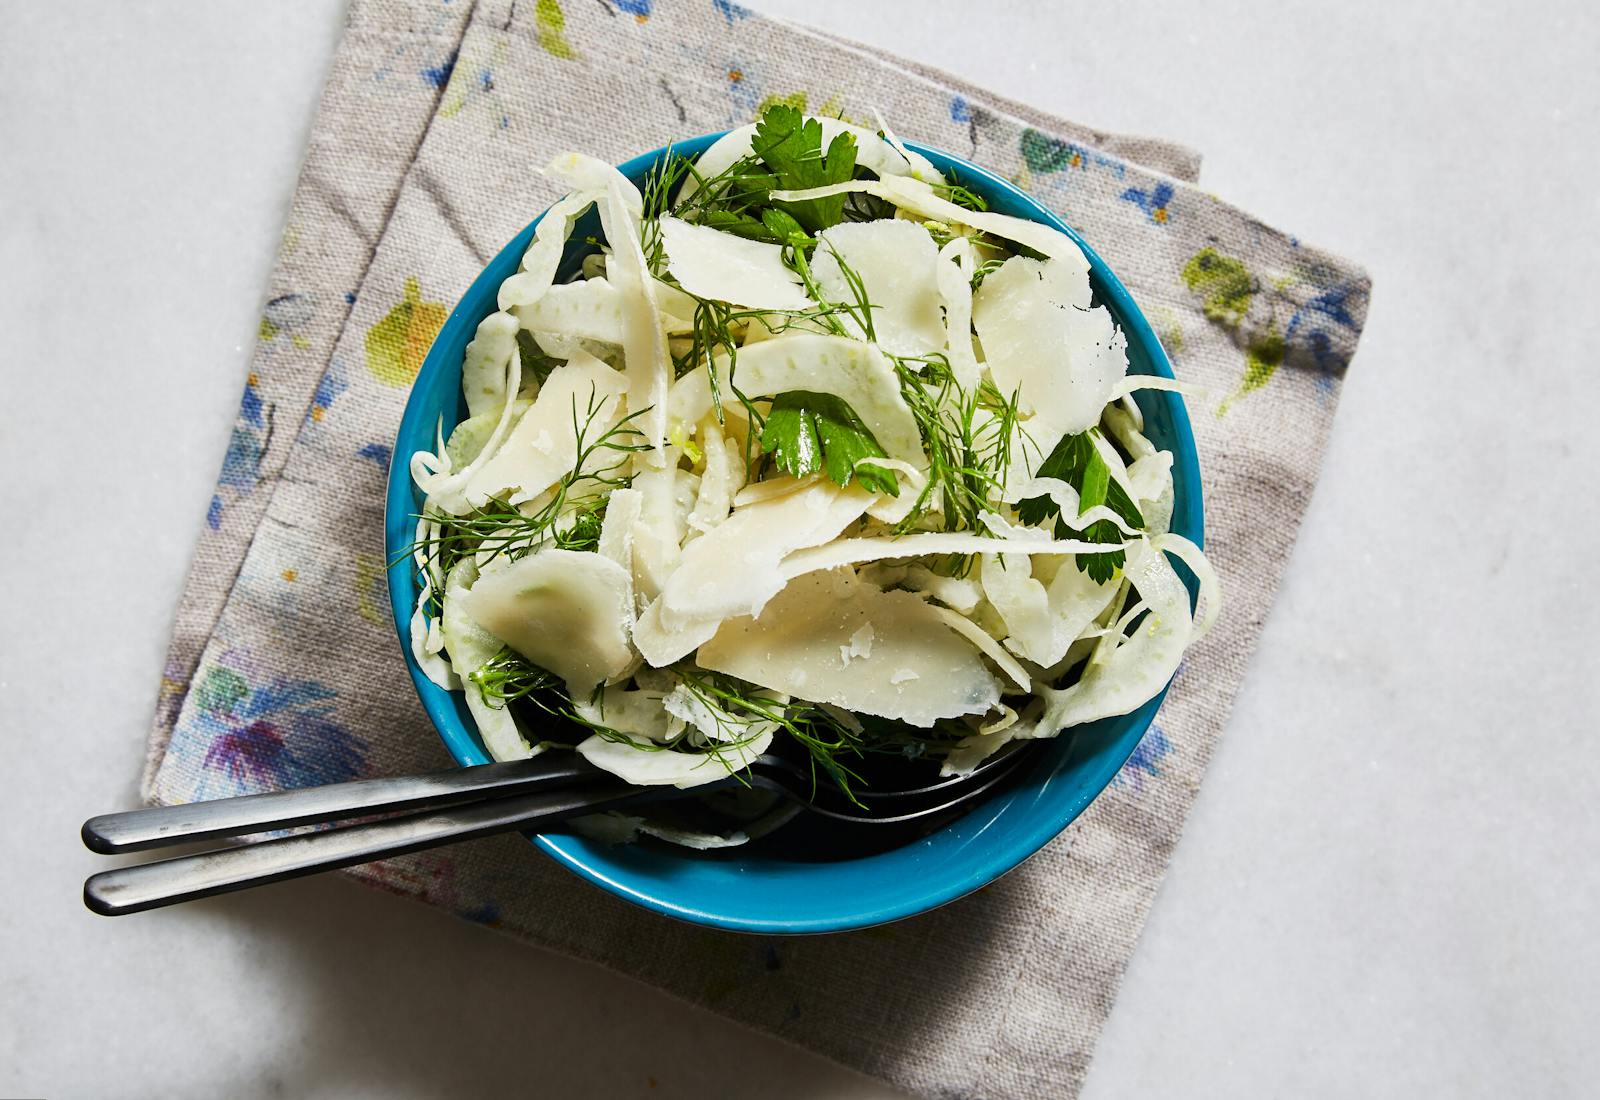 Fennel and Herb Salad